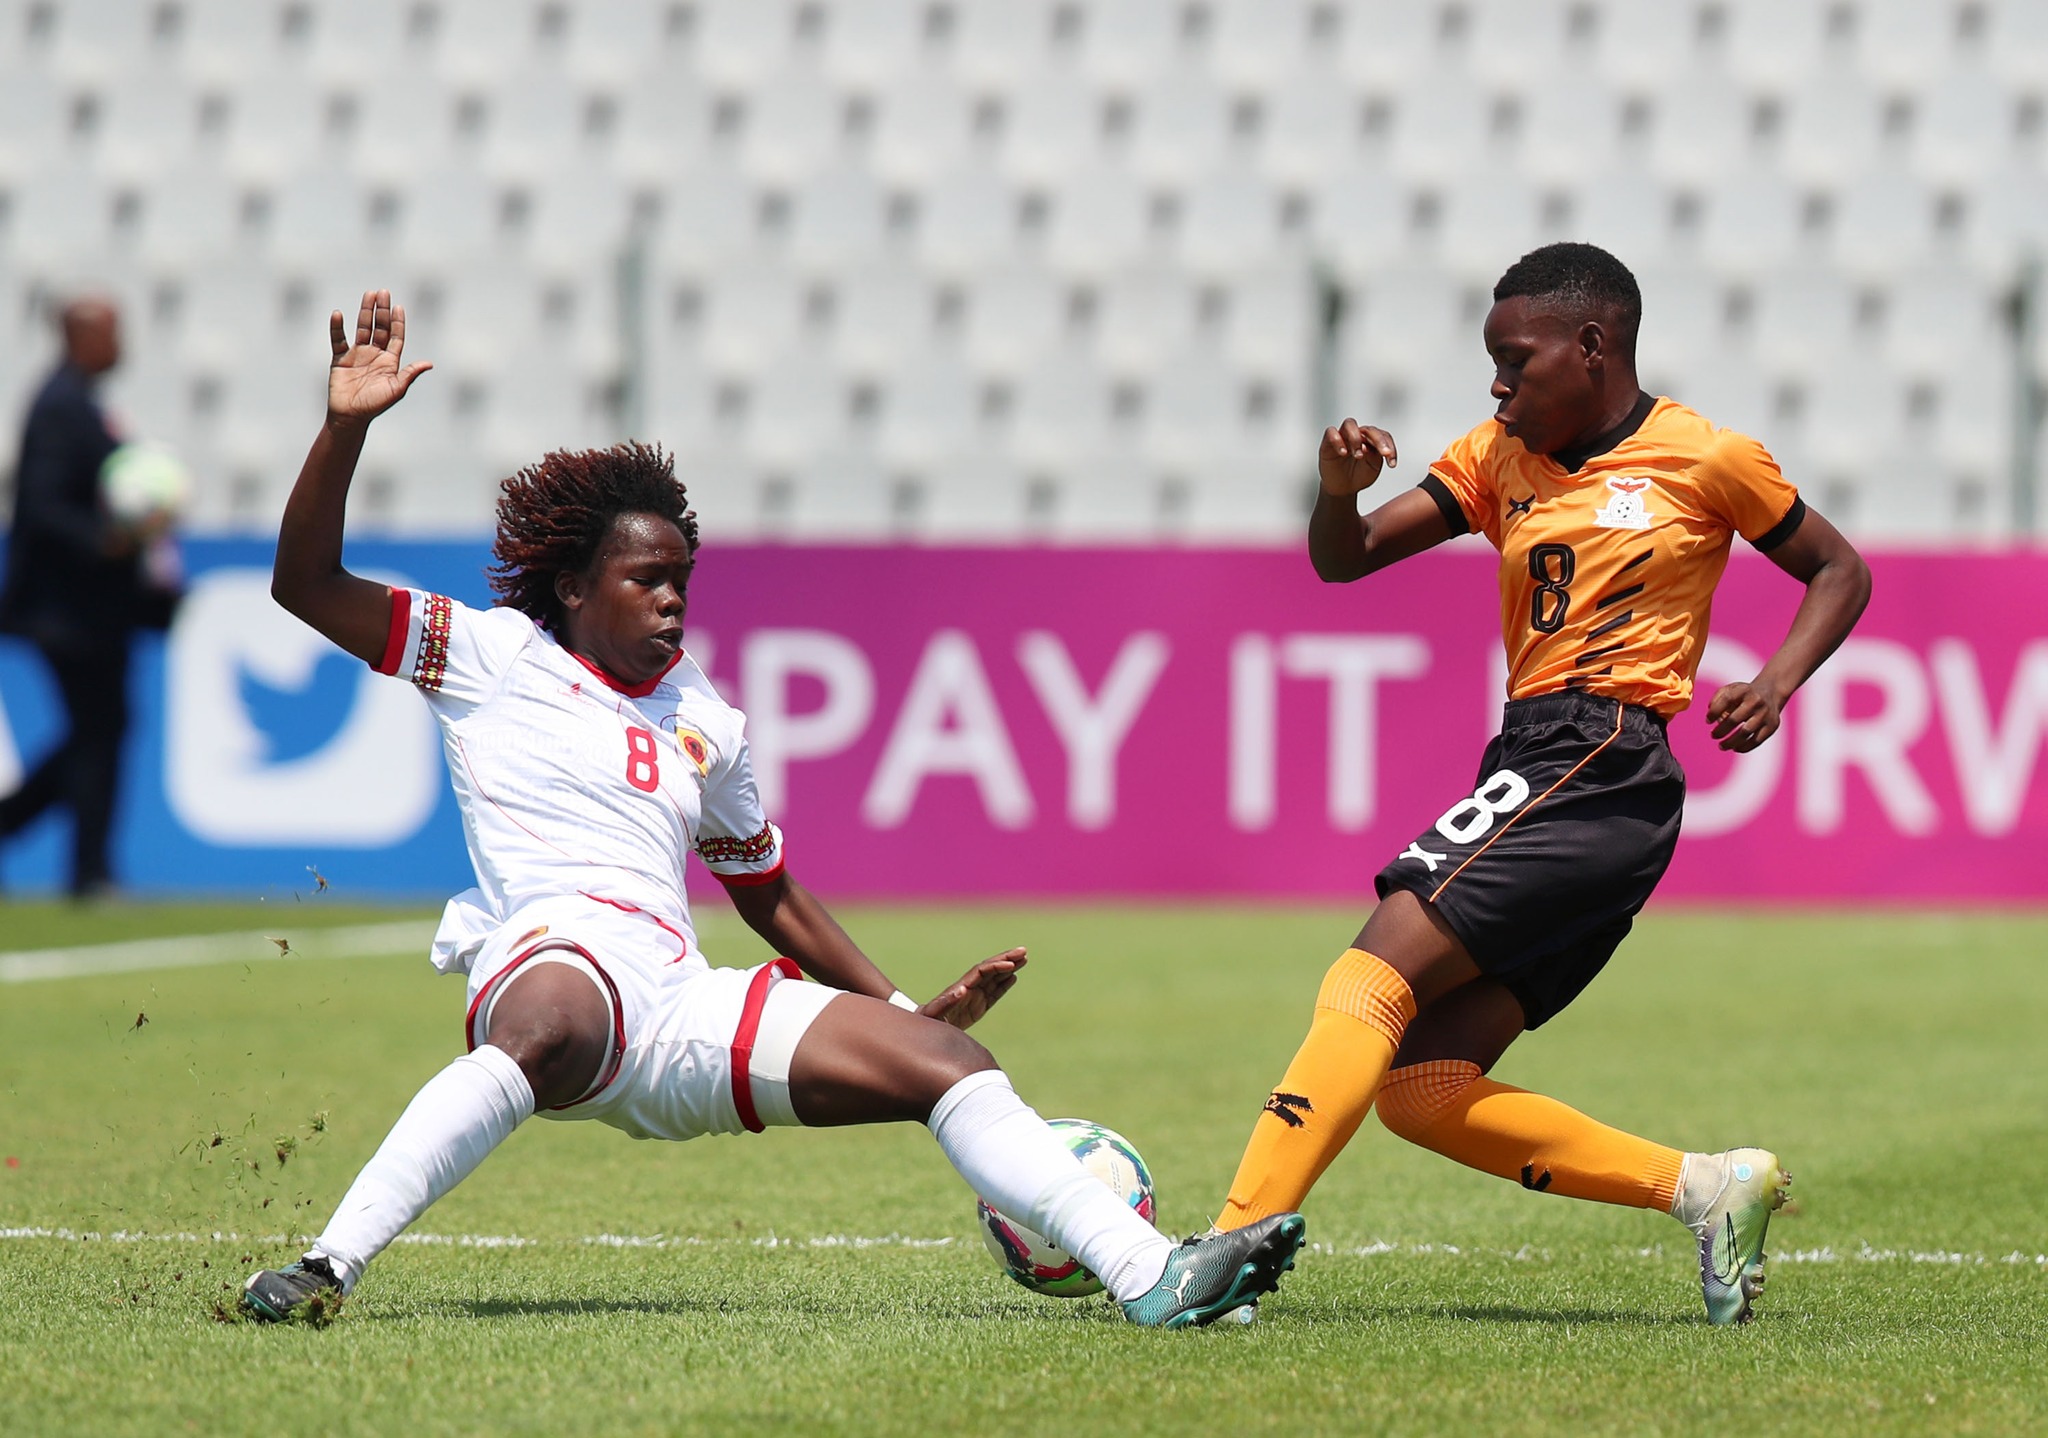 Zambia Secures 3-1 Victory Over Angola in 2023 COSAFA Women's Championship